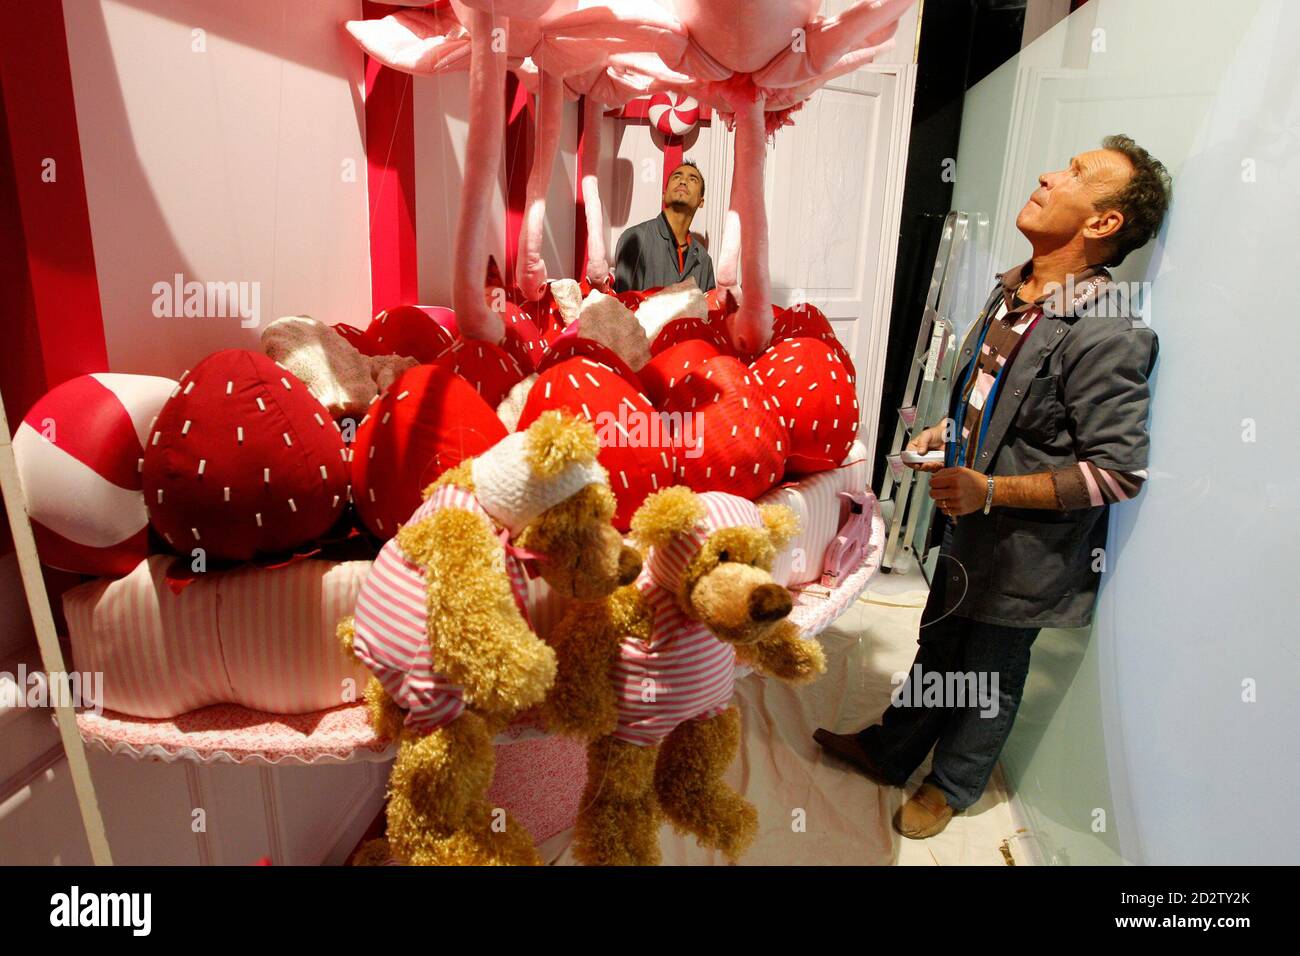 Frenchman Jean-Claude Dehix (R), the head puppeteer for Paris department  stores, prepares stuffed animals whose movements are controlled by strings  and motors, for a Christmas storefront window display on October 28, 2008.